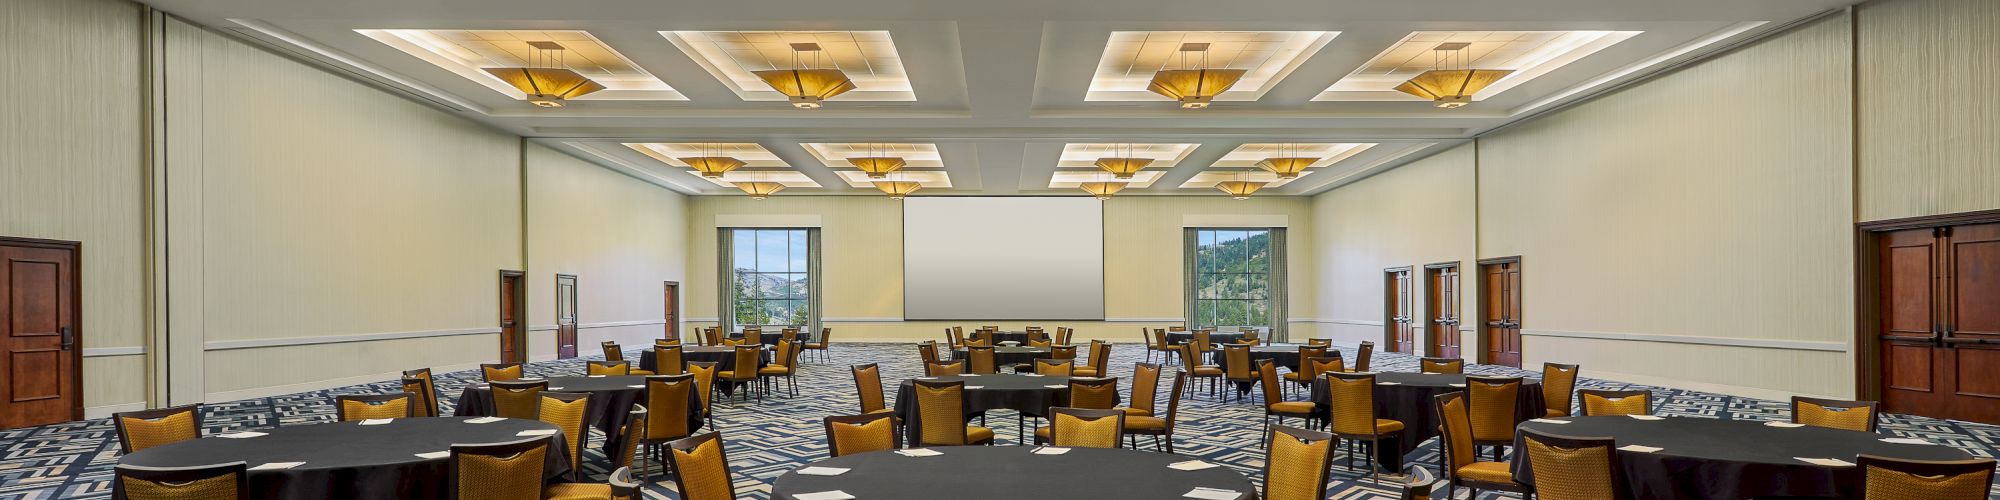 A spacious, well-lit conference room with round tables and yellow cushioned chairs, patterned carpet, and modern ceiling lights.